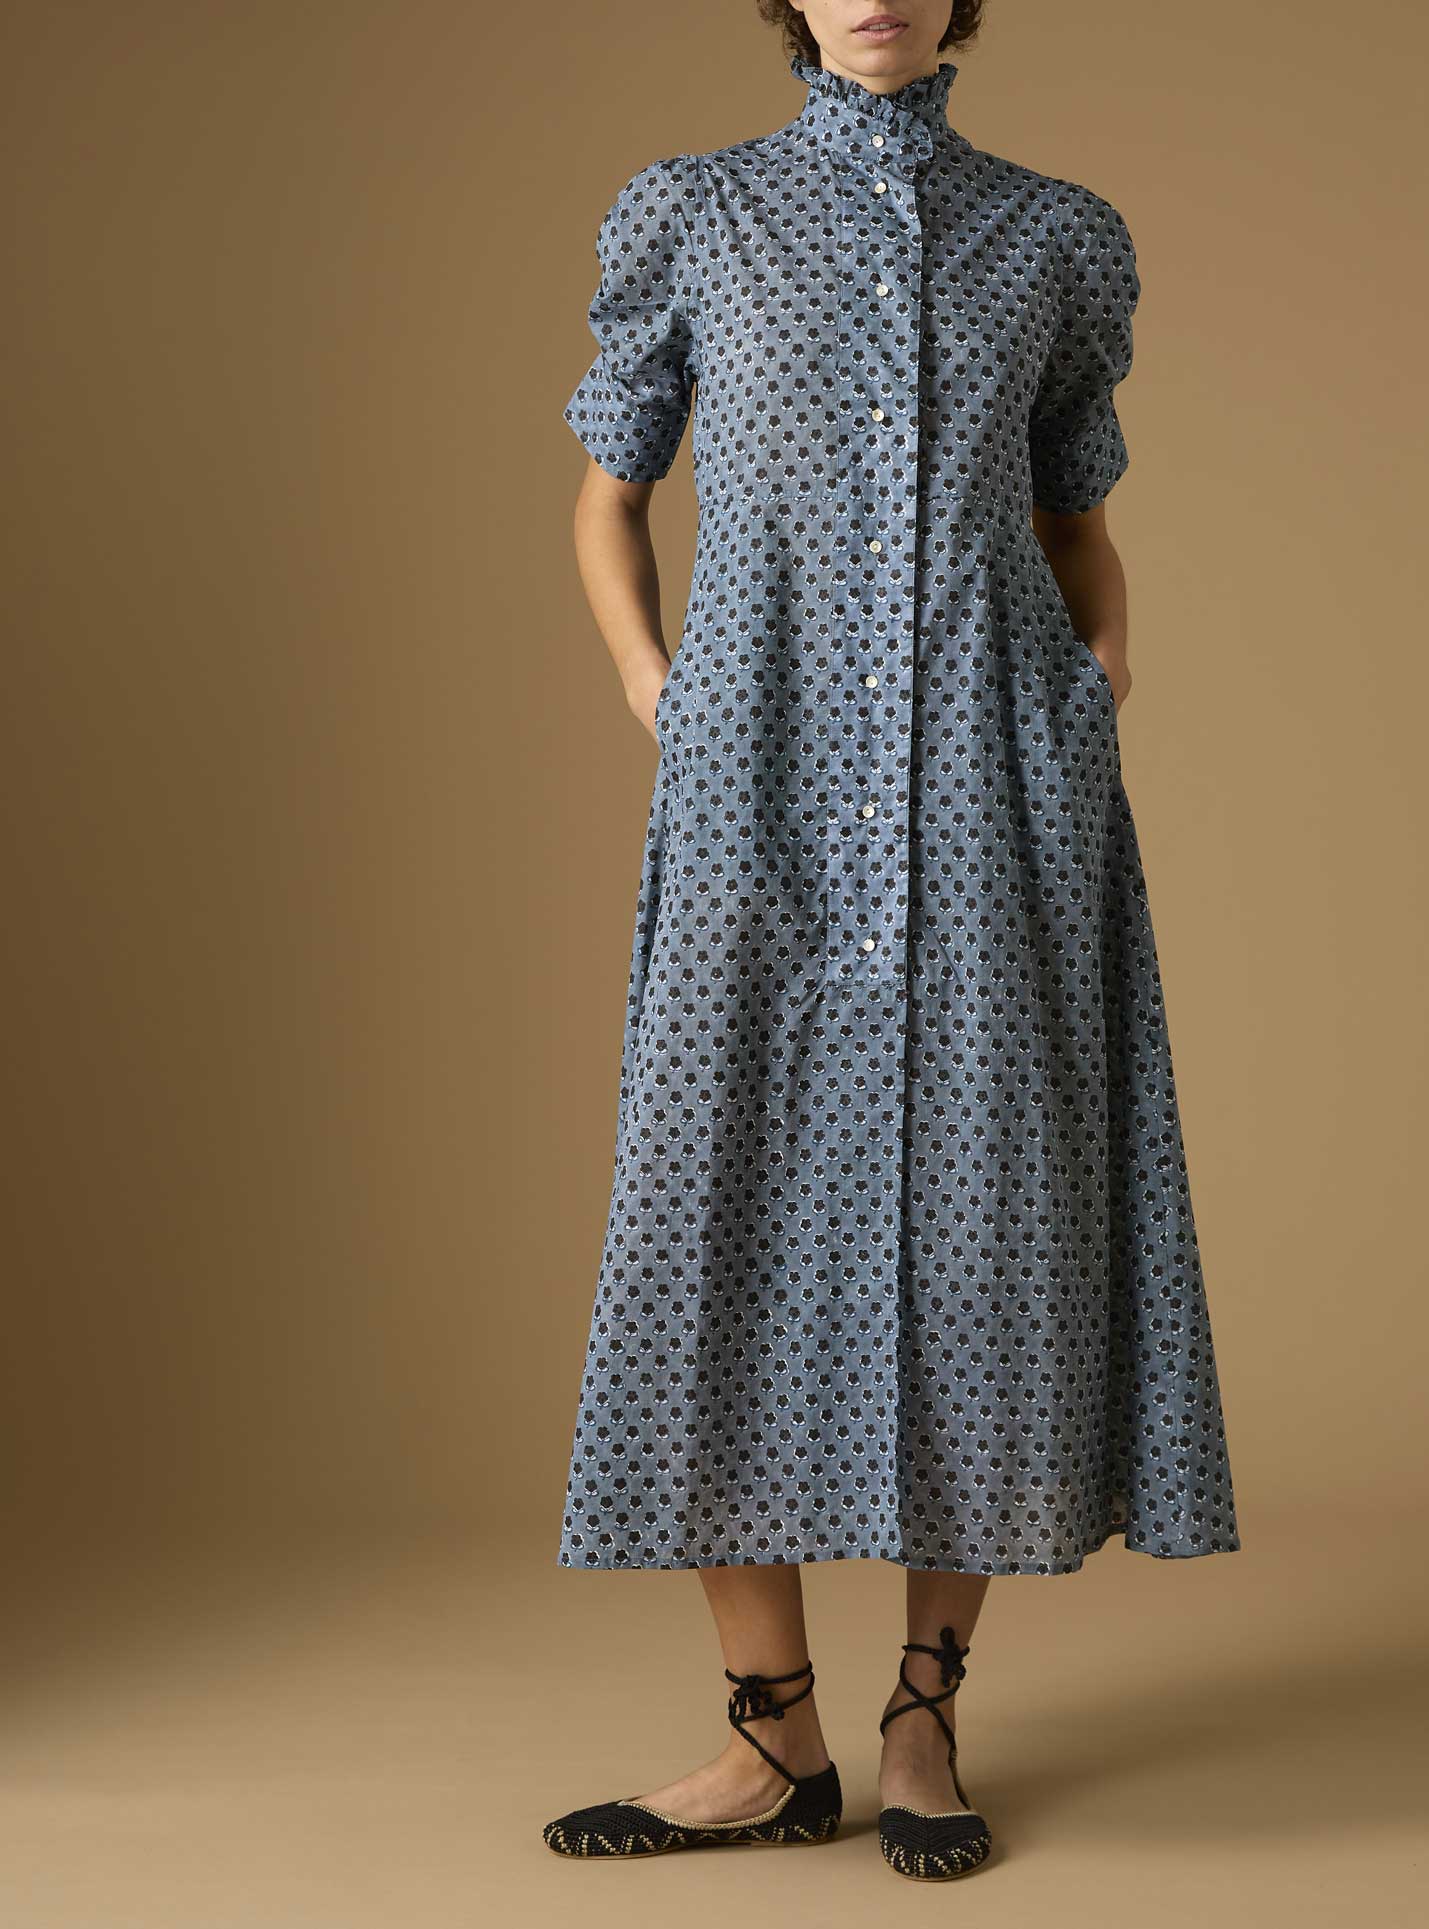 Front view of Venetia Blue Grey / black Voile Dress by Thierry Colson